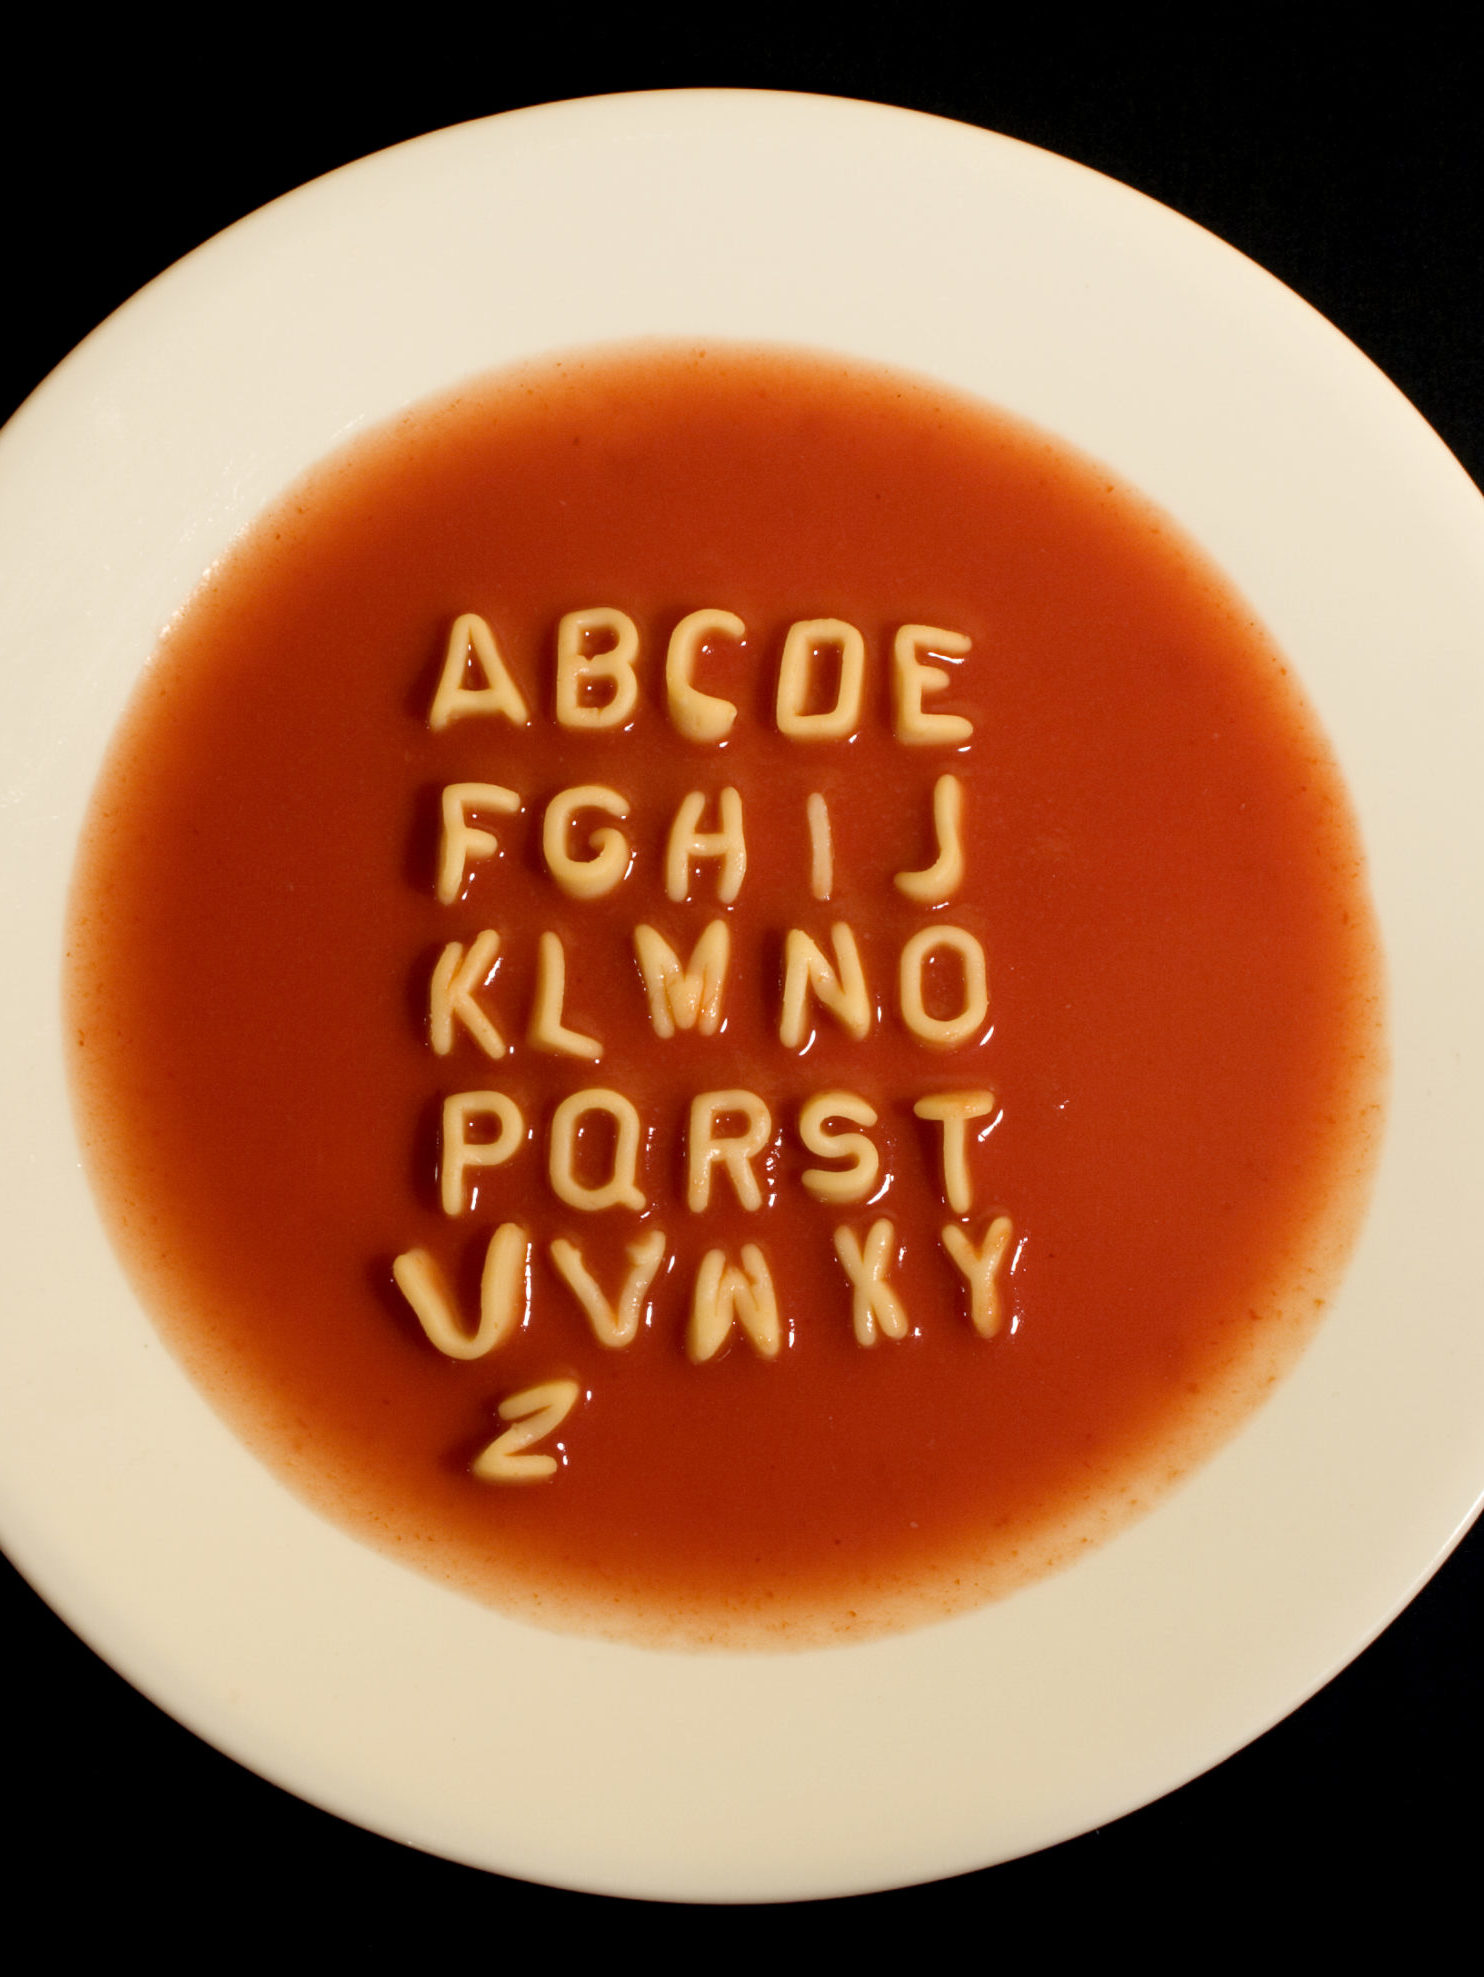 Alphabet soup letters are laid out in a tomato soup to spell the alphabet.